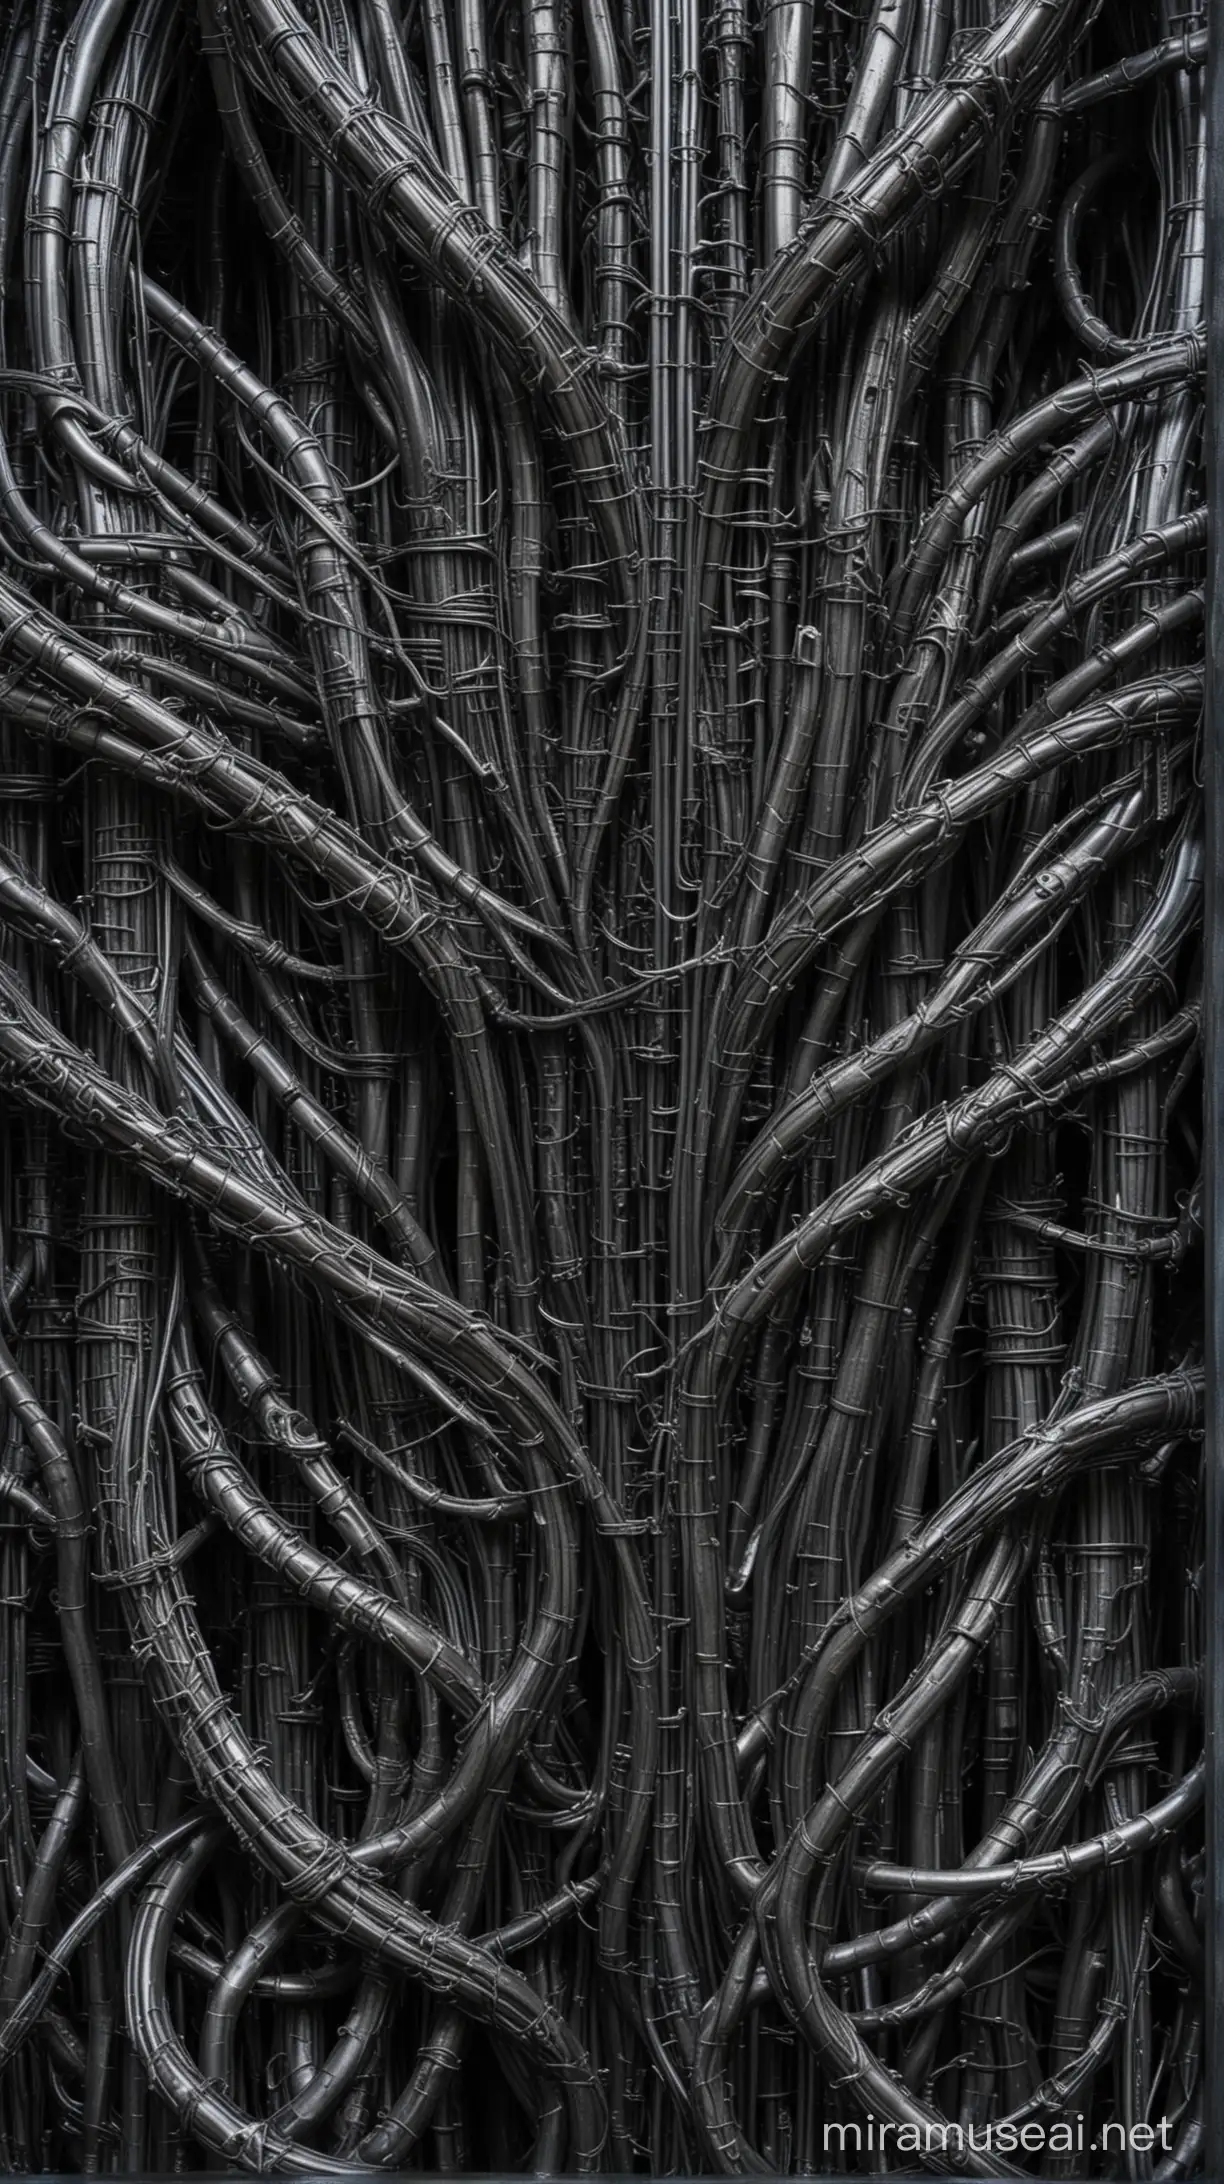 Twisted Wires in Surreal Giger Style Art